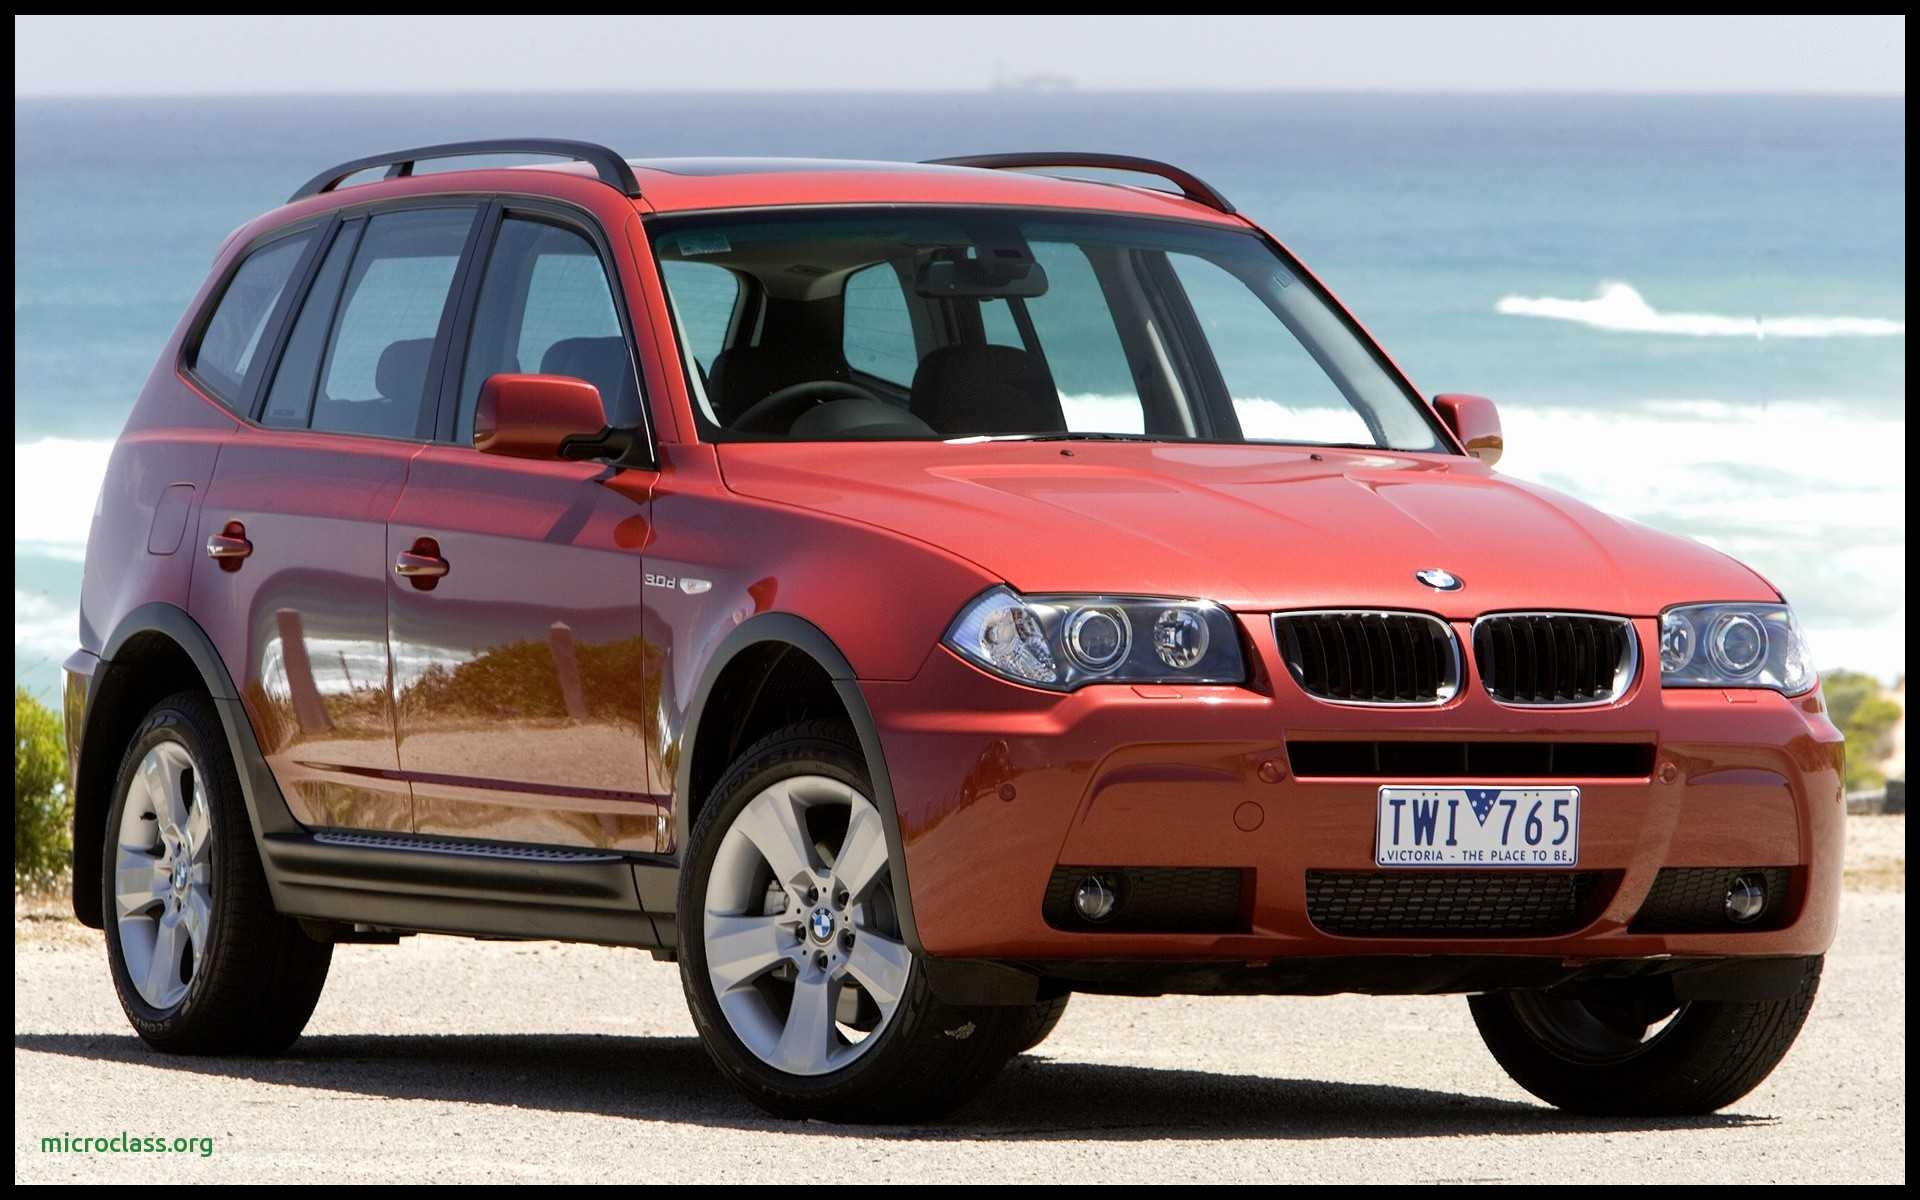 Hd Wallpaper For Pc Best New Cool Car Wallpapers Fresh Bmw X3 3 0d M Bmw Wallpaper Mobile